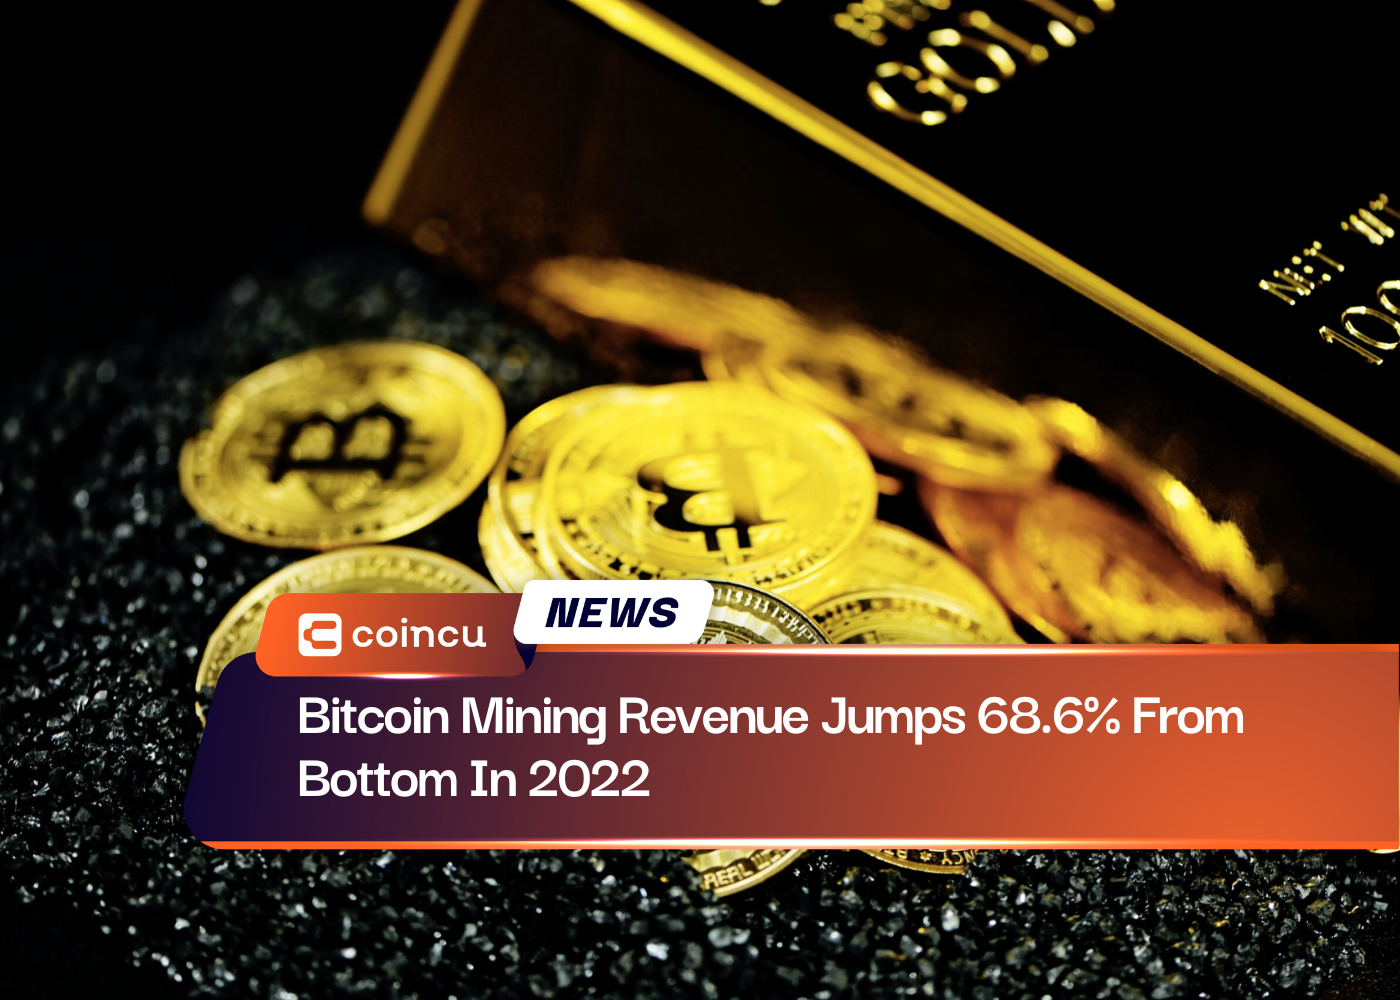 Bitcoin Mining Revenue Jumps 68.6% From Bottom In 2022